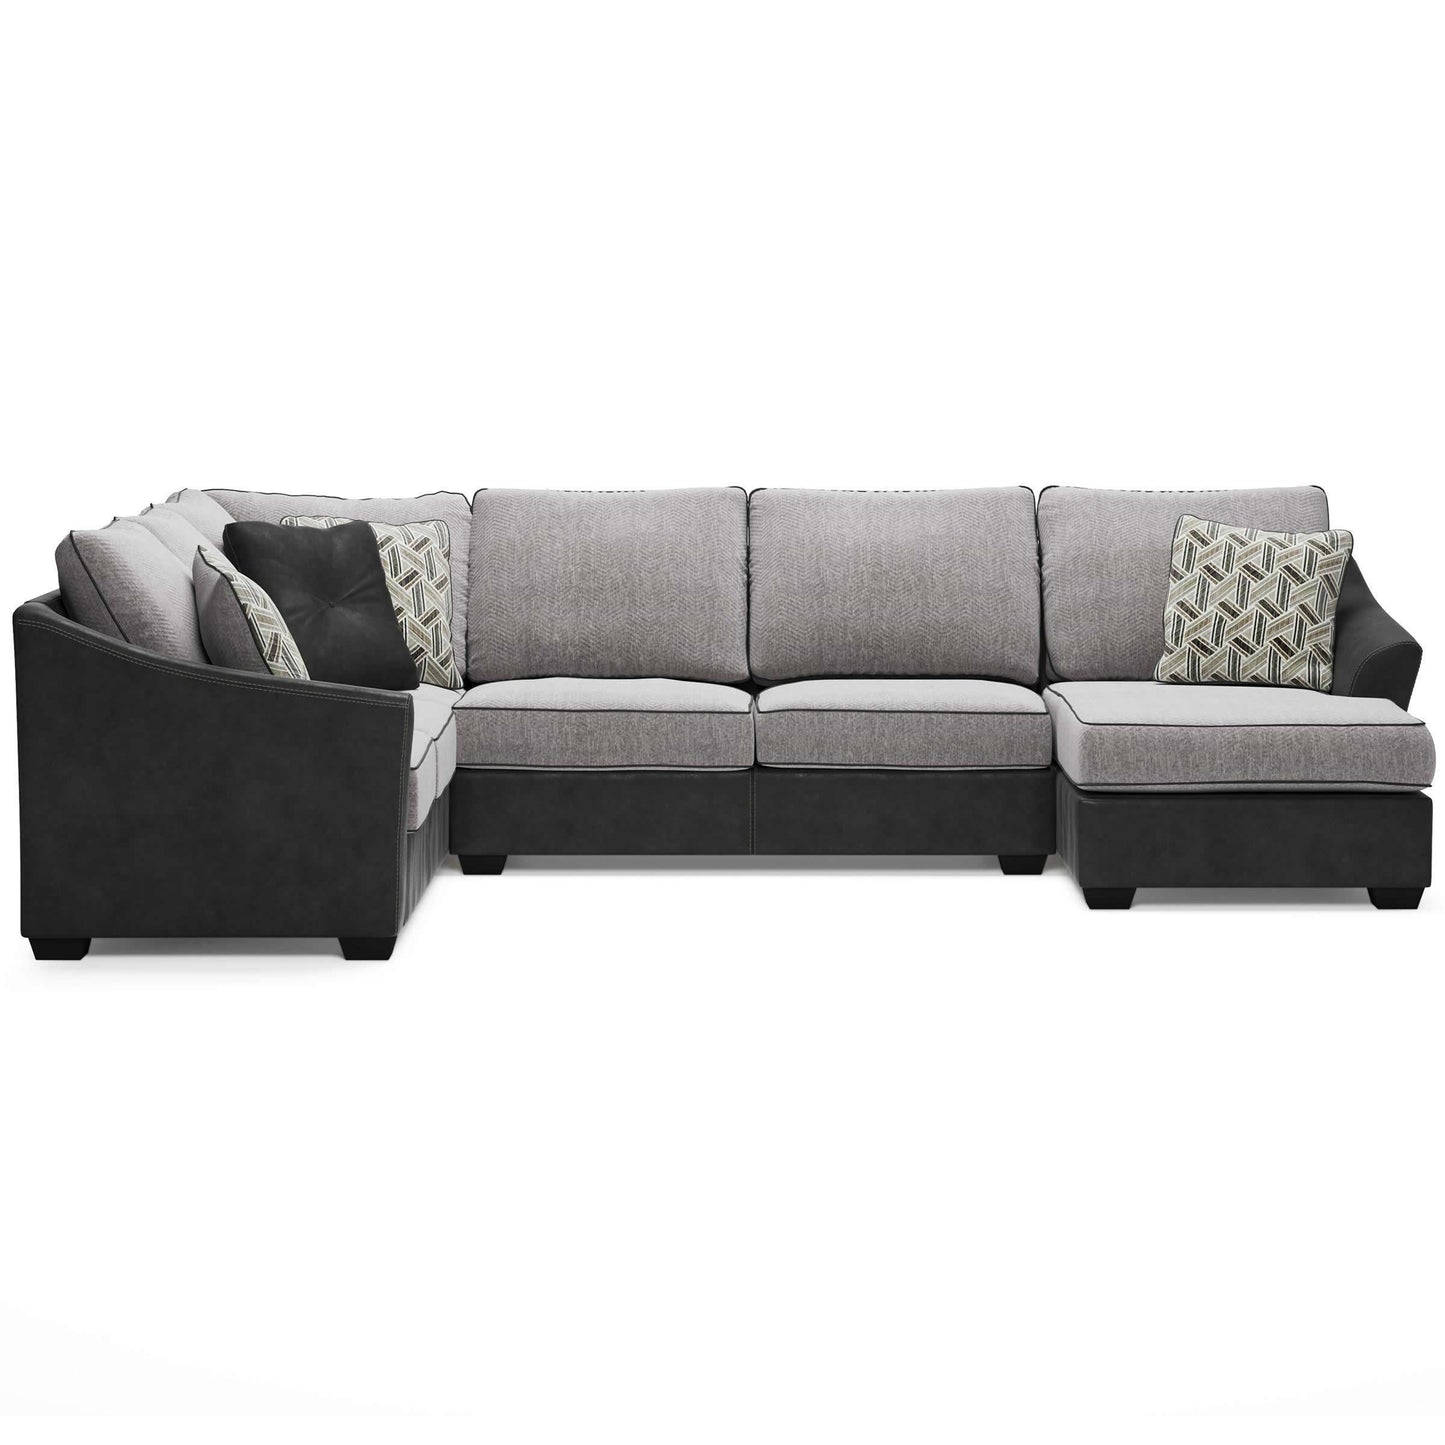 Signature Design by Ashley Bilgray Fabric and Leather Look 3 pc Sectional 5500348/5500334/5500317